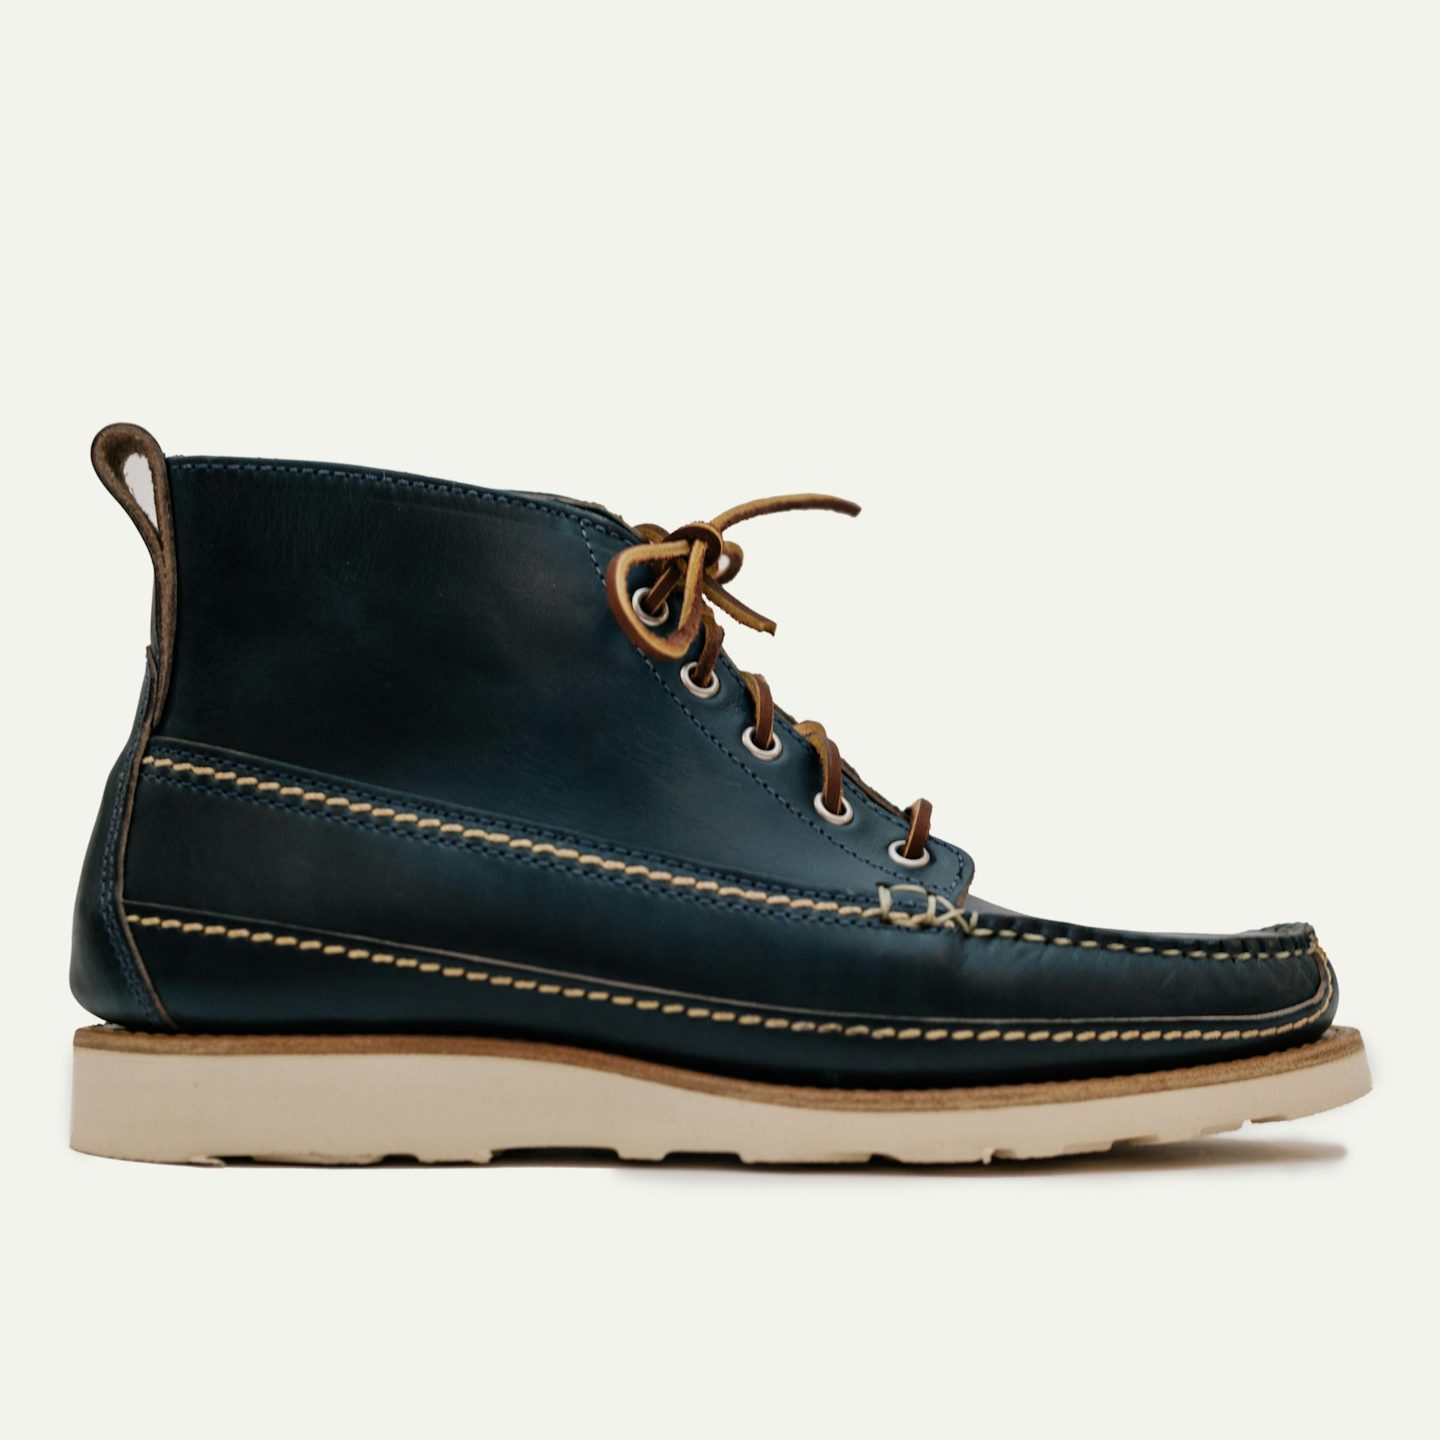 Camp Boot - Navy Chromexcel, Vibram Christy Sole - Made in USA 